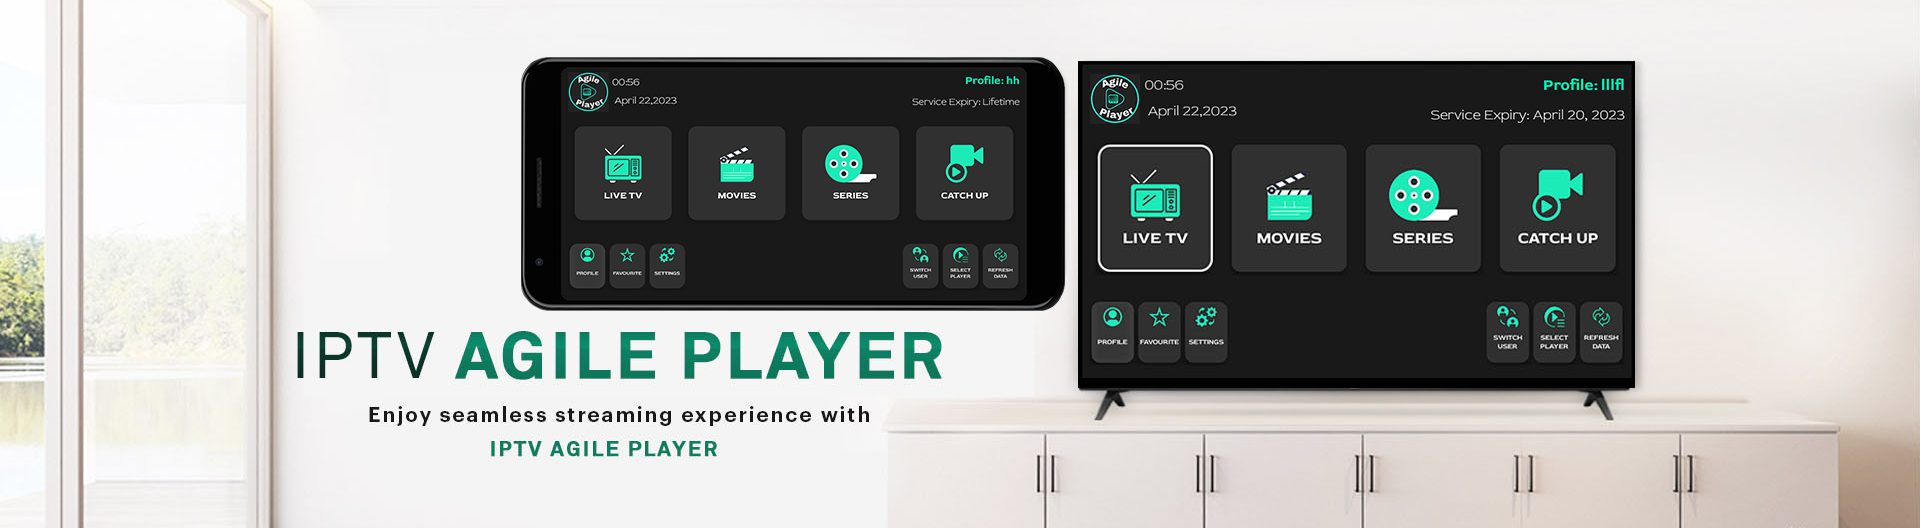 IPTV Agile Player is a fast and reliable IPTV/OTT player that enables you to watch your content smoothly. Get the best out of your IPTV/OTT experience with IPTV Agile Player.